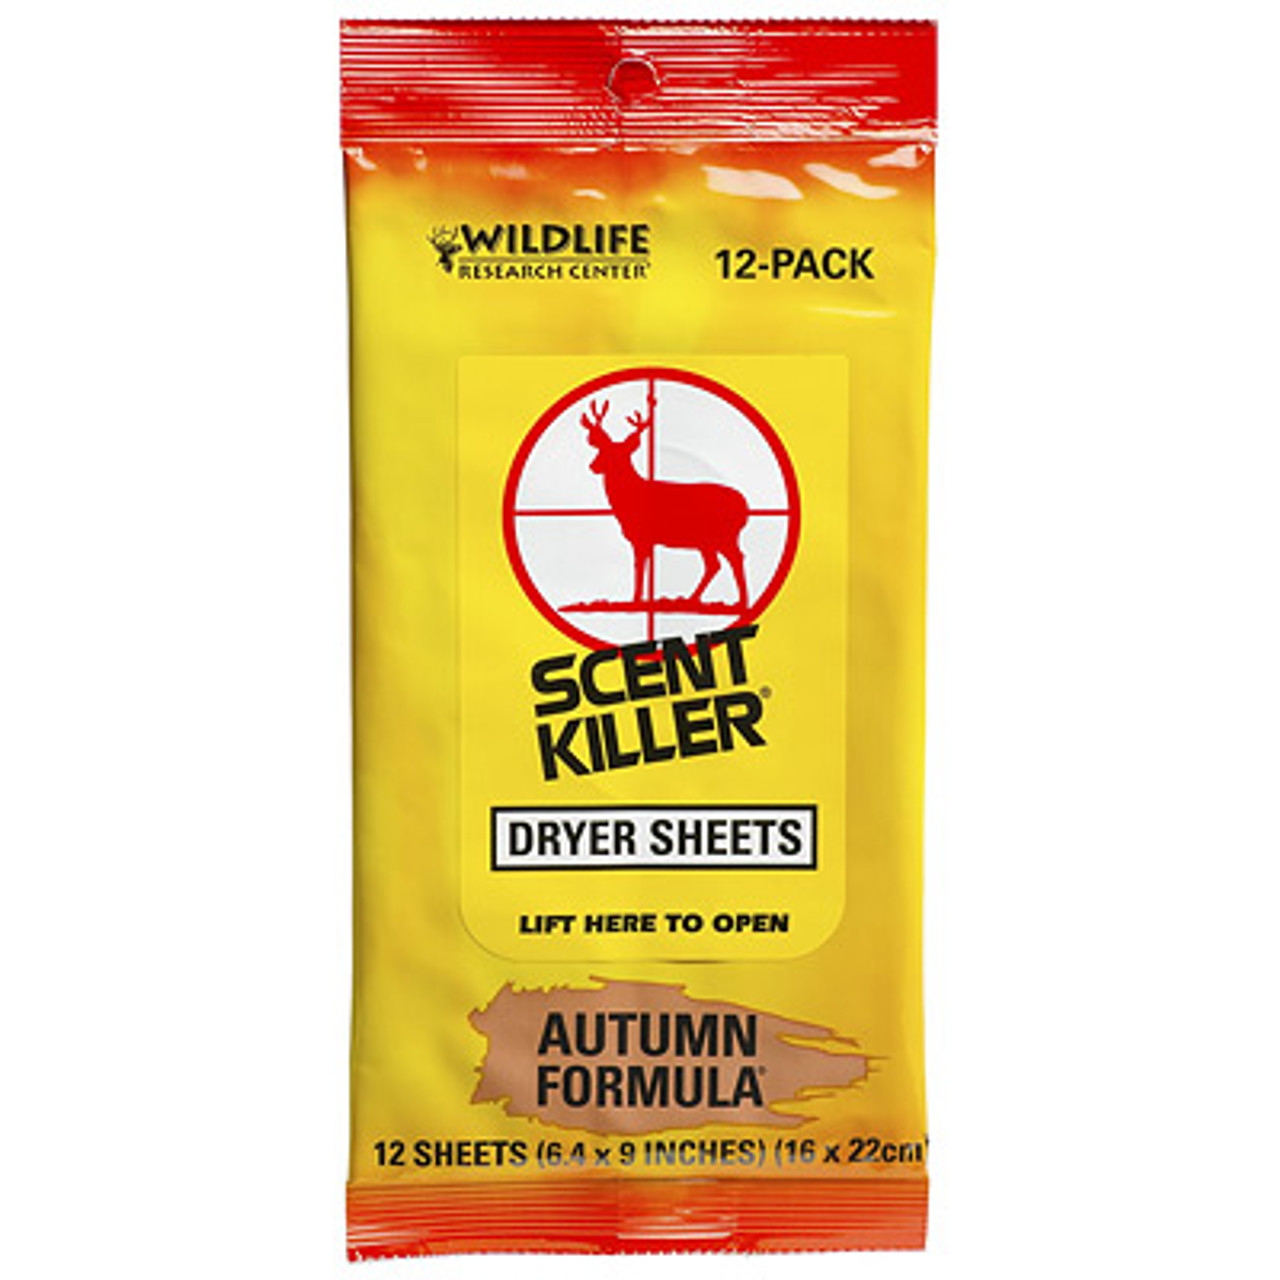 Scent Killer Autumn Formula Dryer Sheets by Wildlife Research